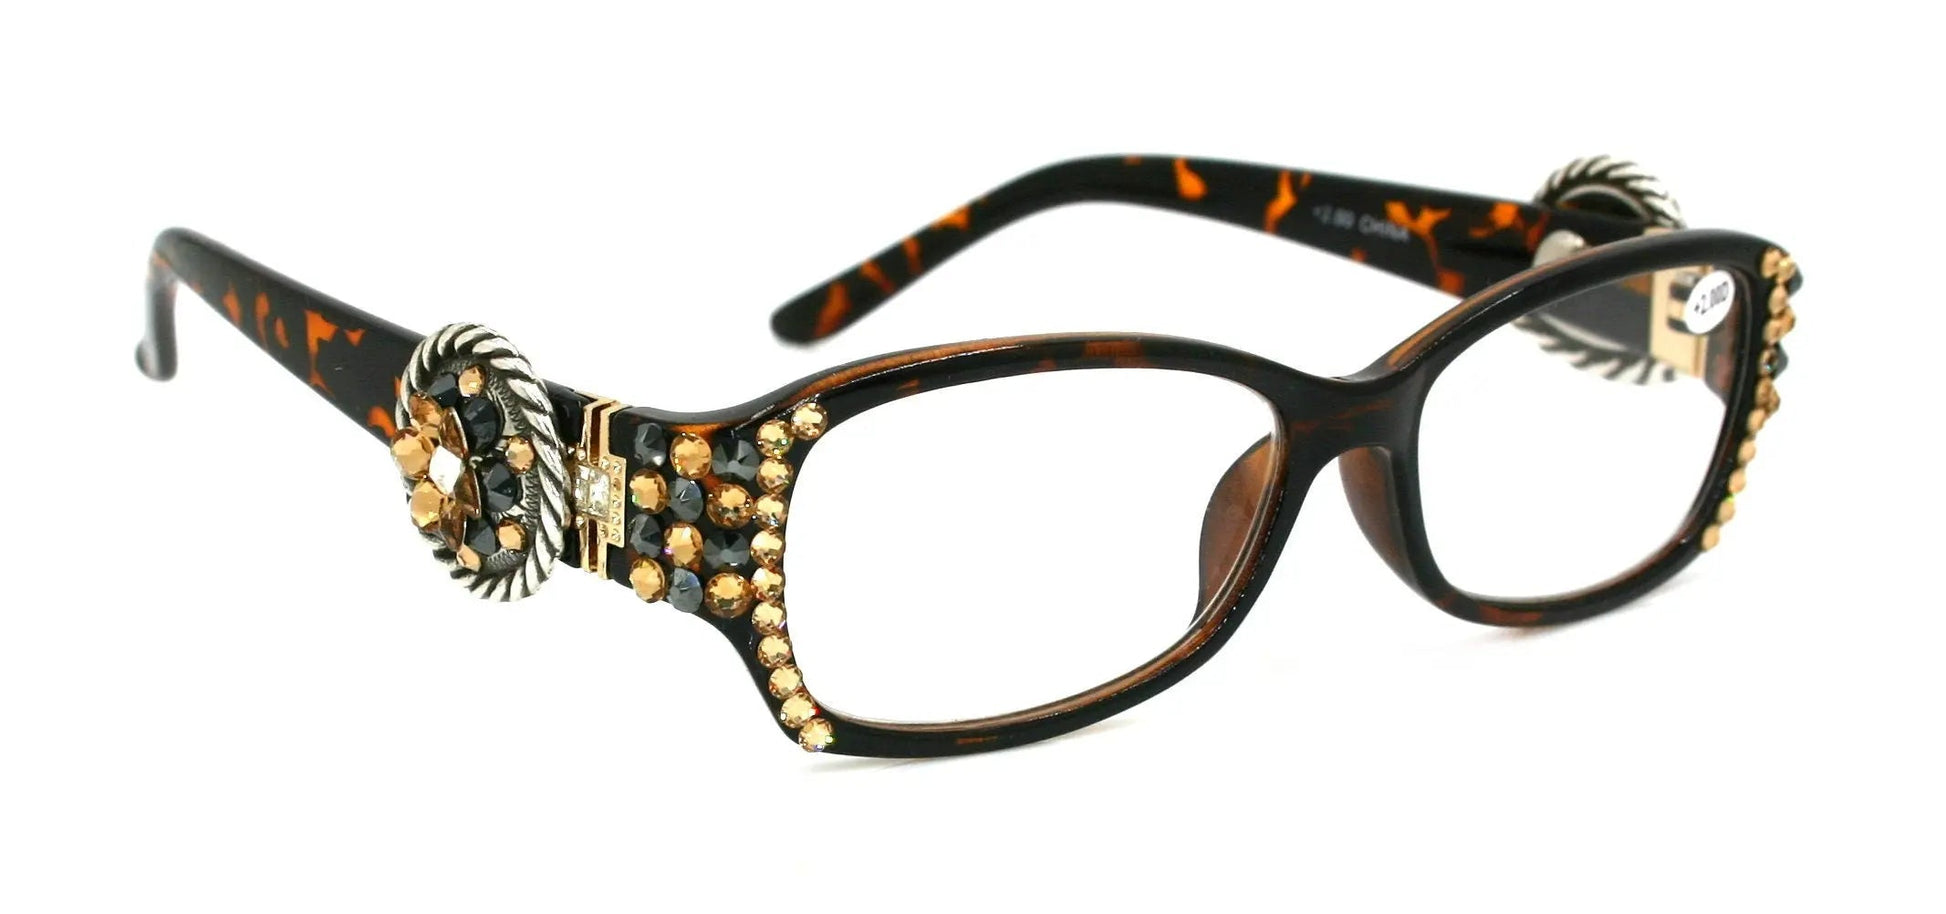 The Medallion, (Bling) Women Reading Glasses W (Hematite, L. Colorado) Genuine European Crystals (Tortoise Brown)  Concho. NY Fifth Avenue. 